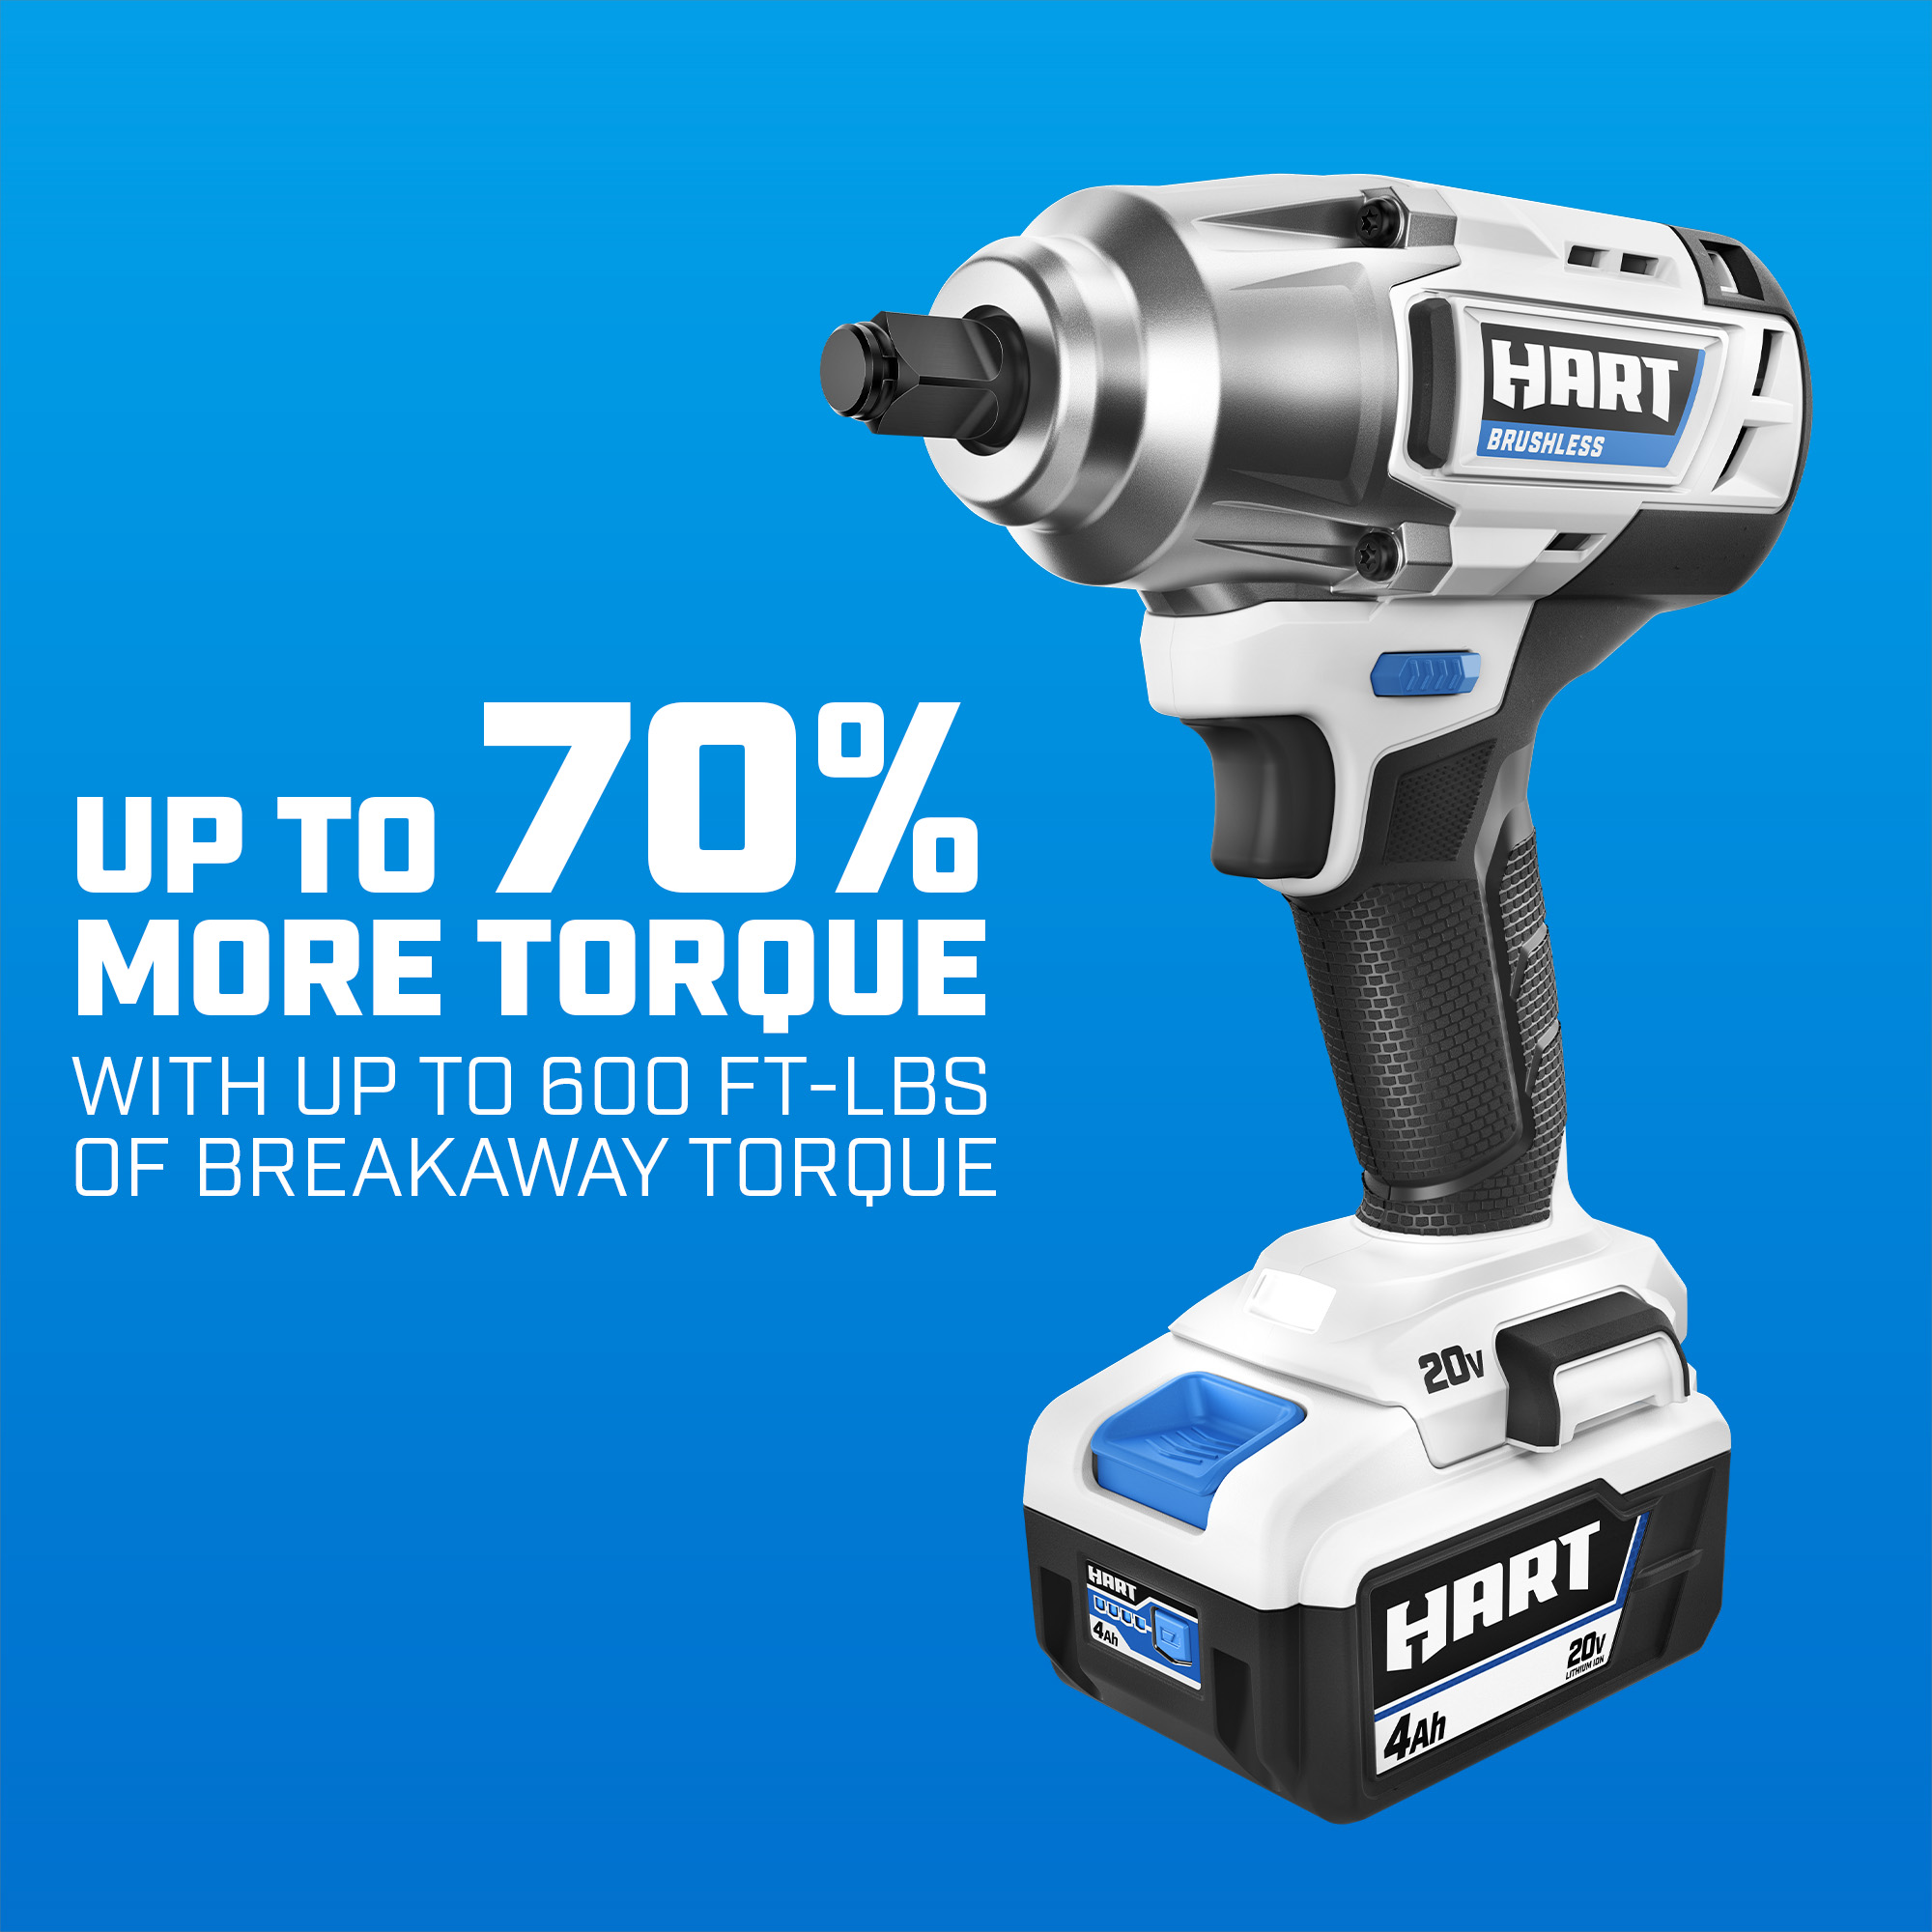 up to 70% more torque with up to 600 ft-lbs. of breakaway torque